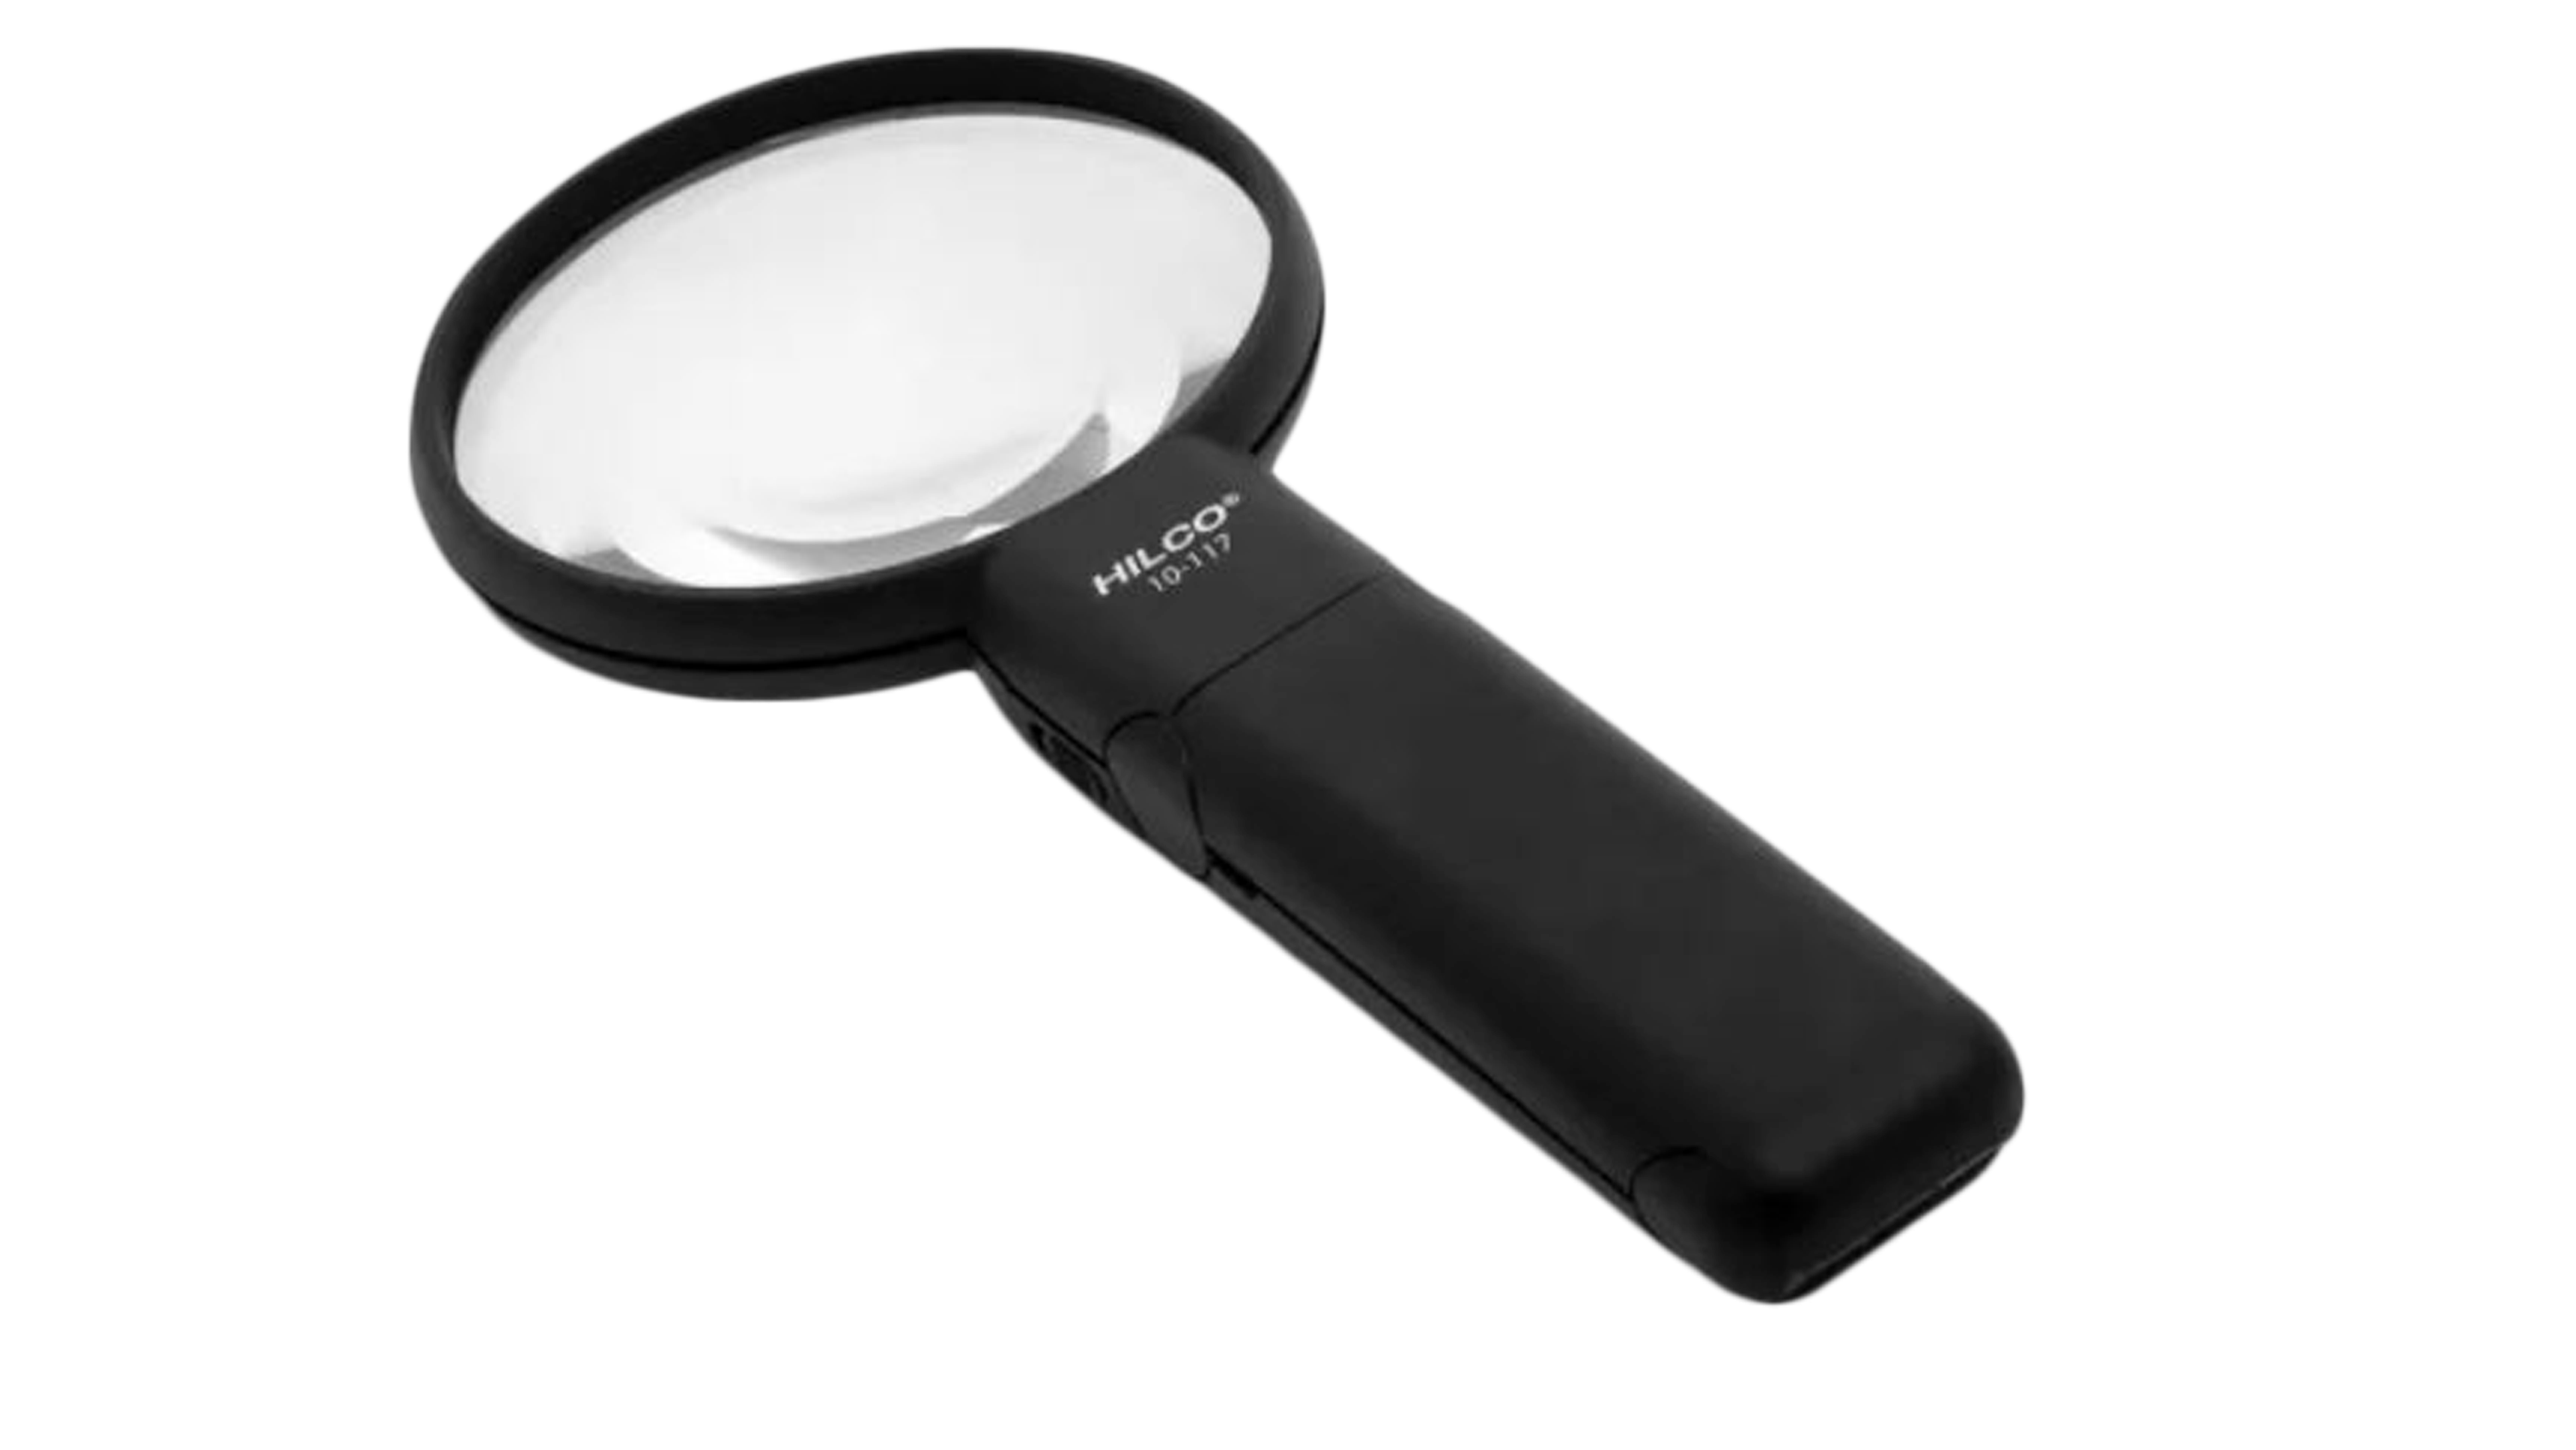 Front Vision Express Multi-Angle Illuminated Magnifier